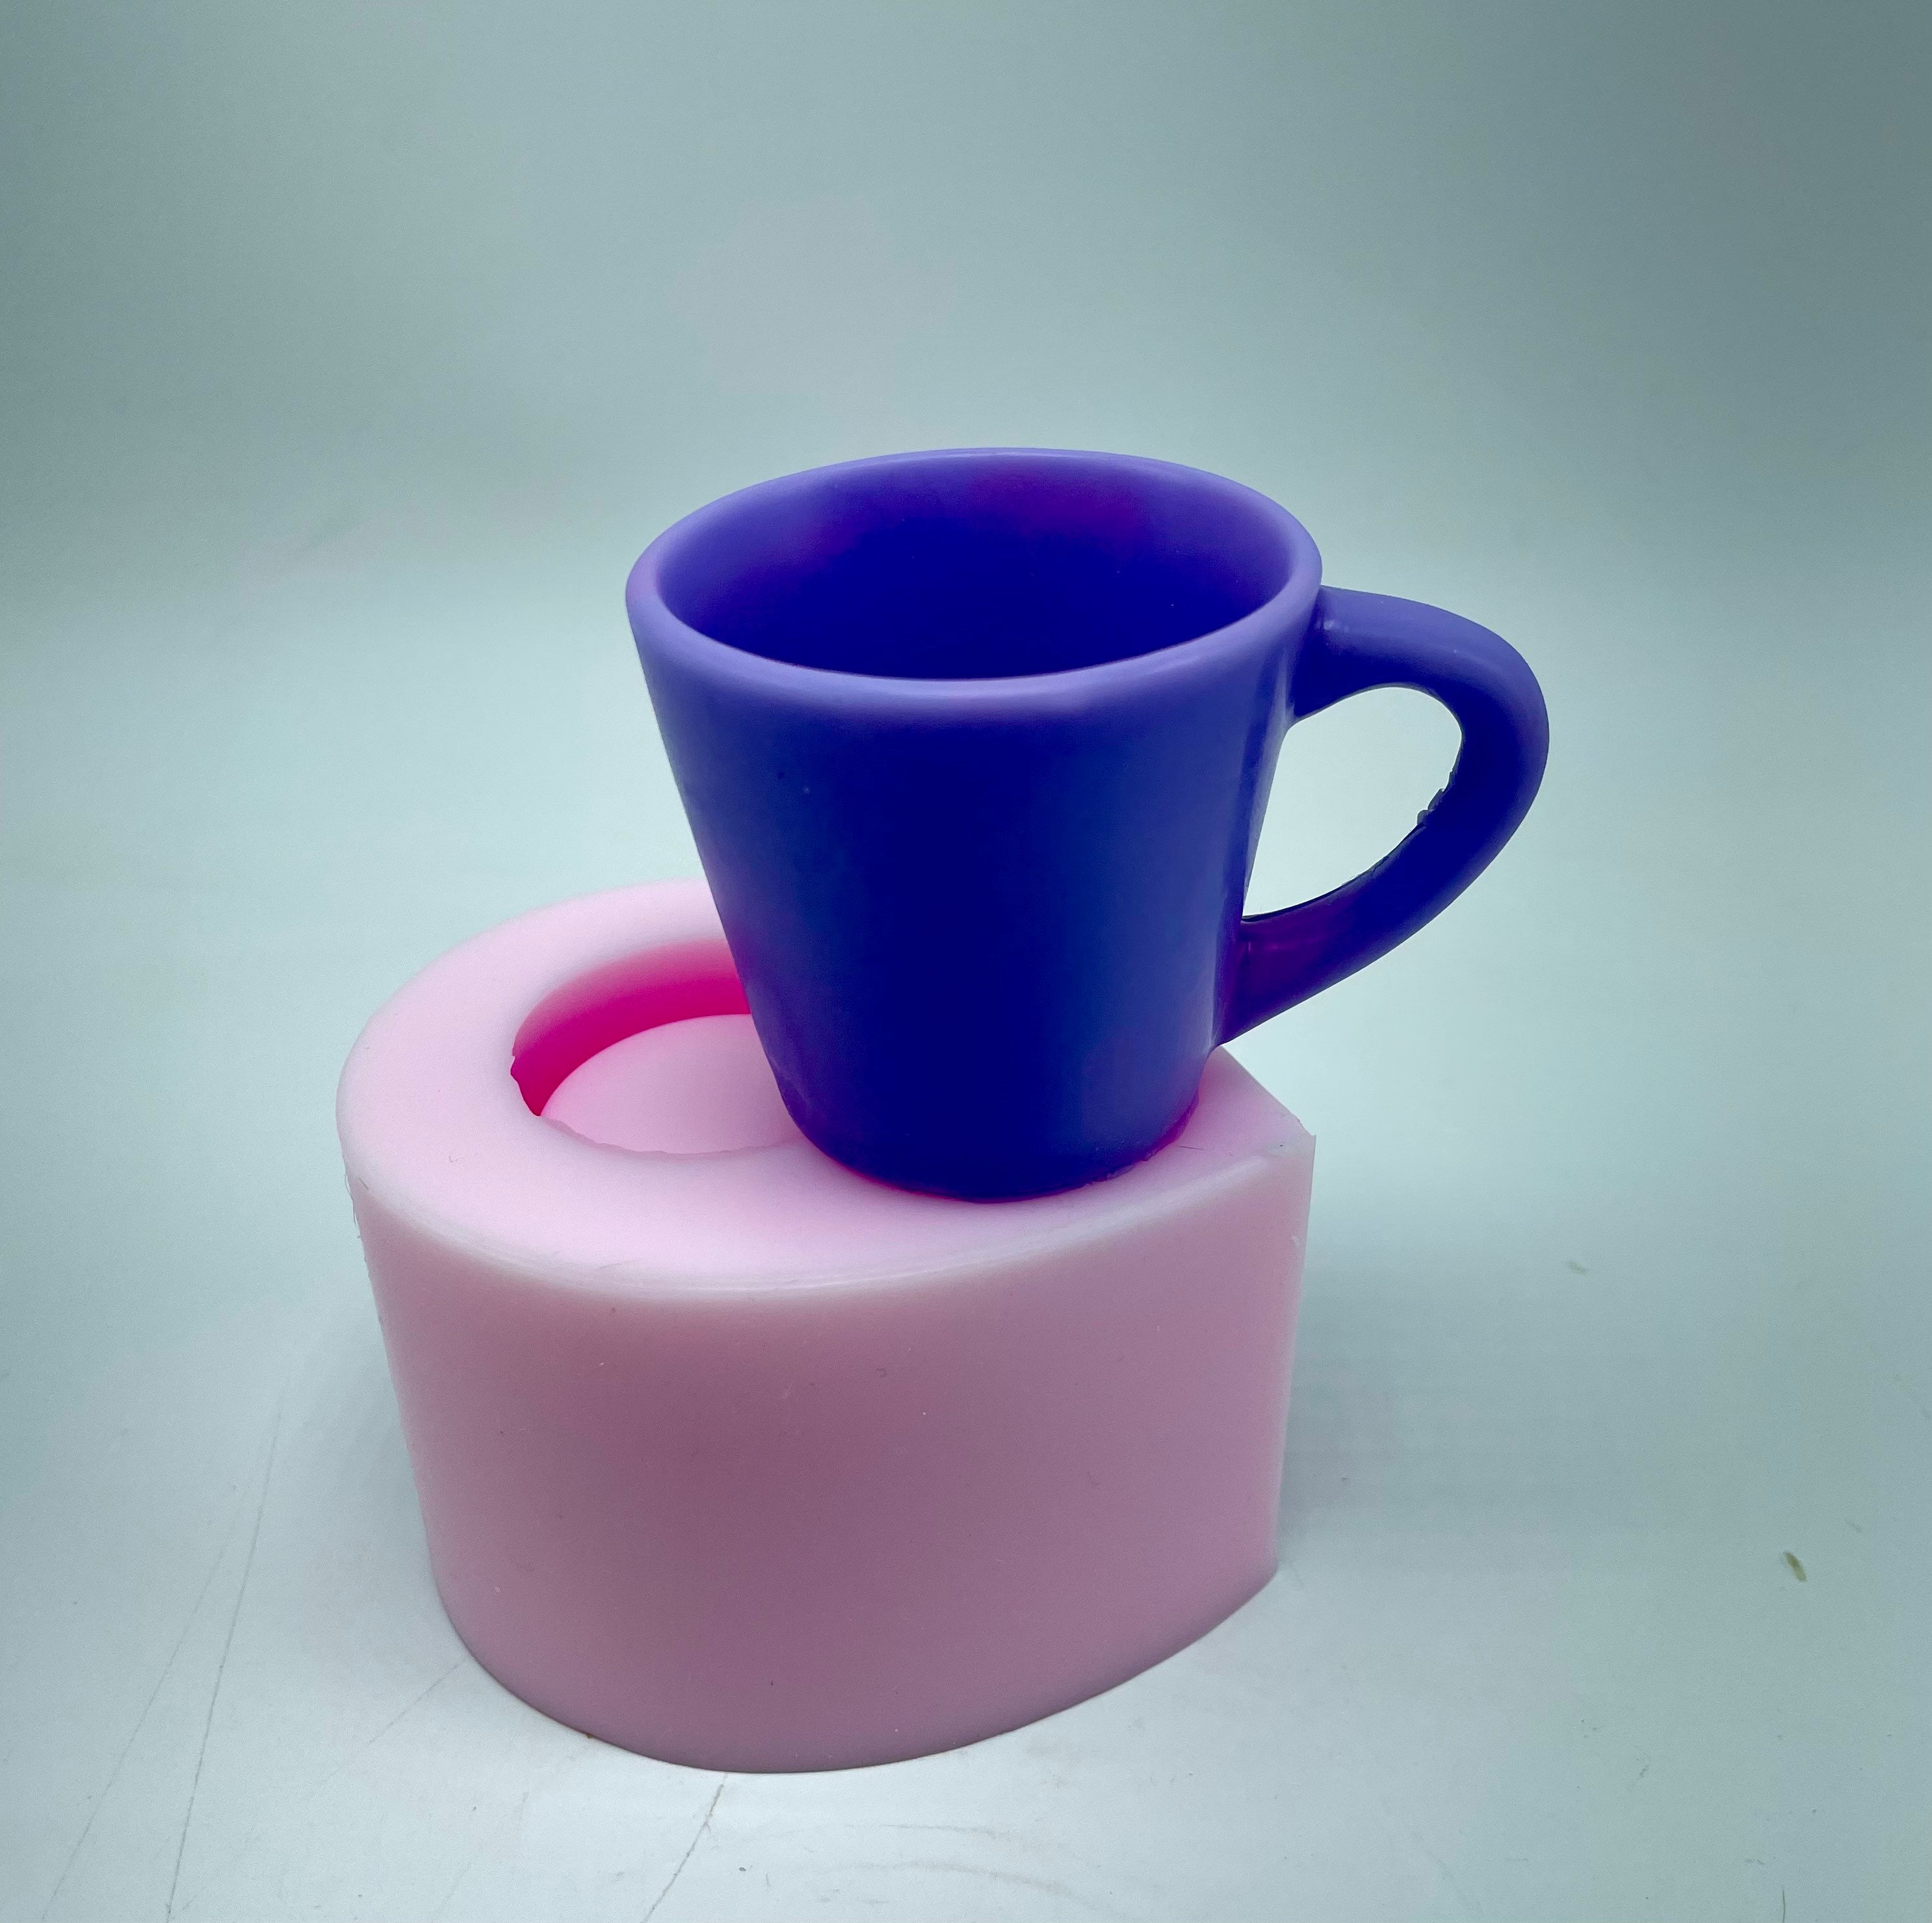 Coffee Mug Mold. Small Tea Cup Mold. Hot Chocolate Cup Craft Silicone Mold  for Soap, Epoxy, Etc -  Canada